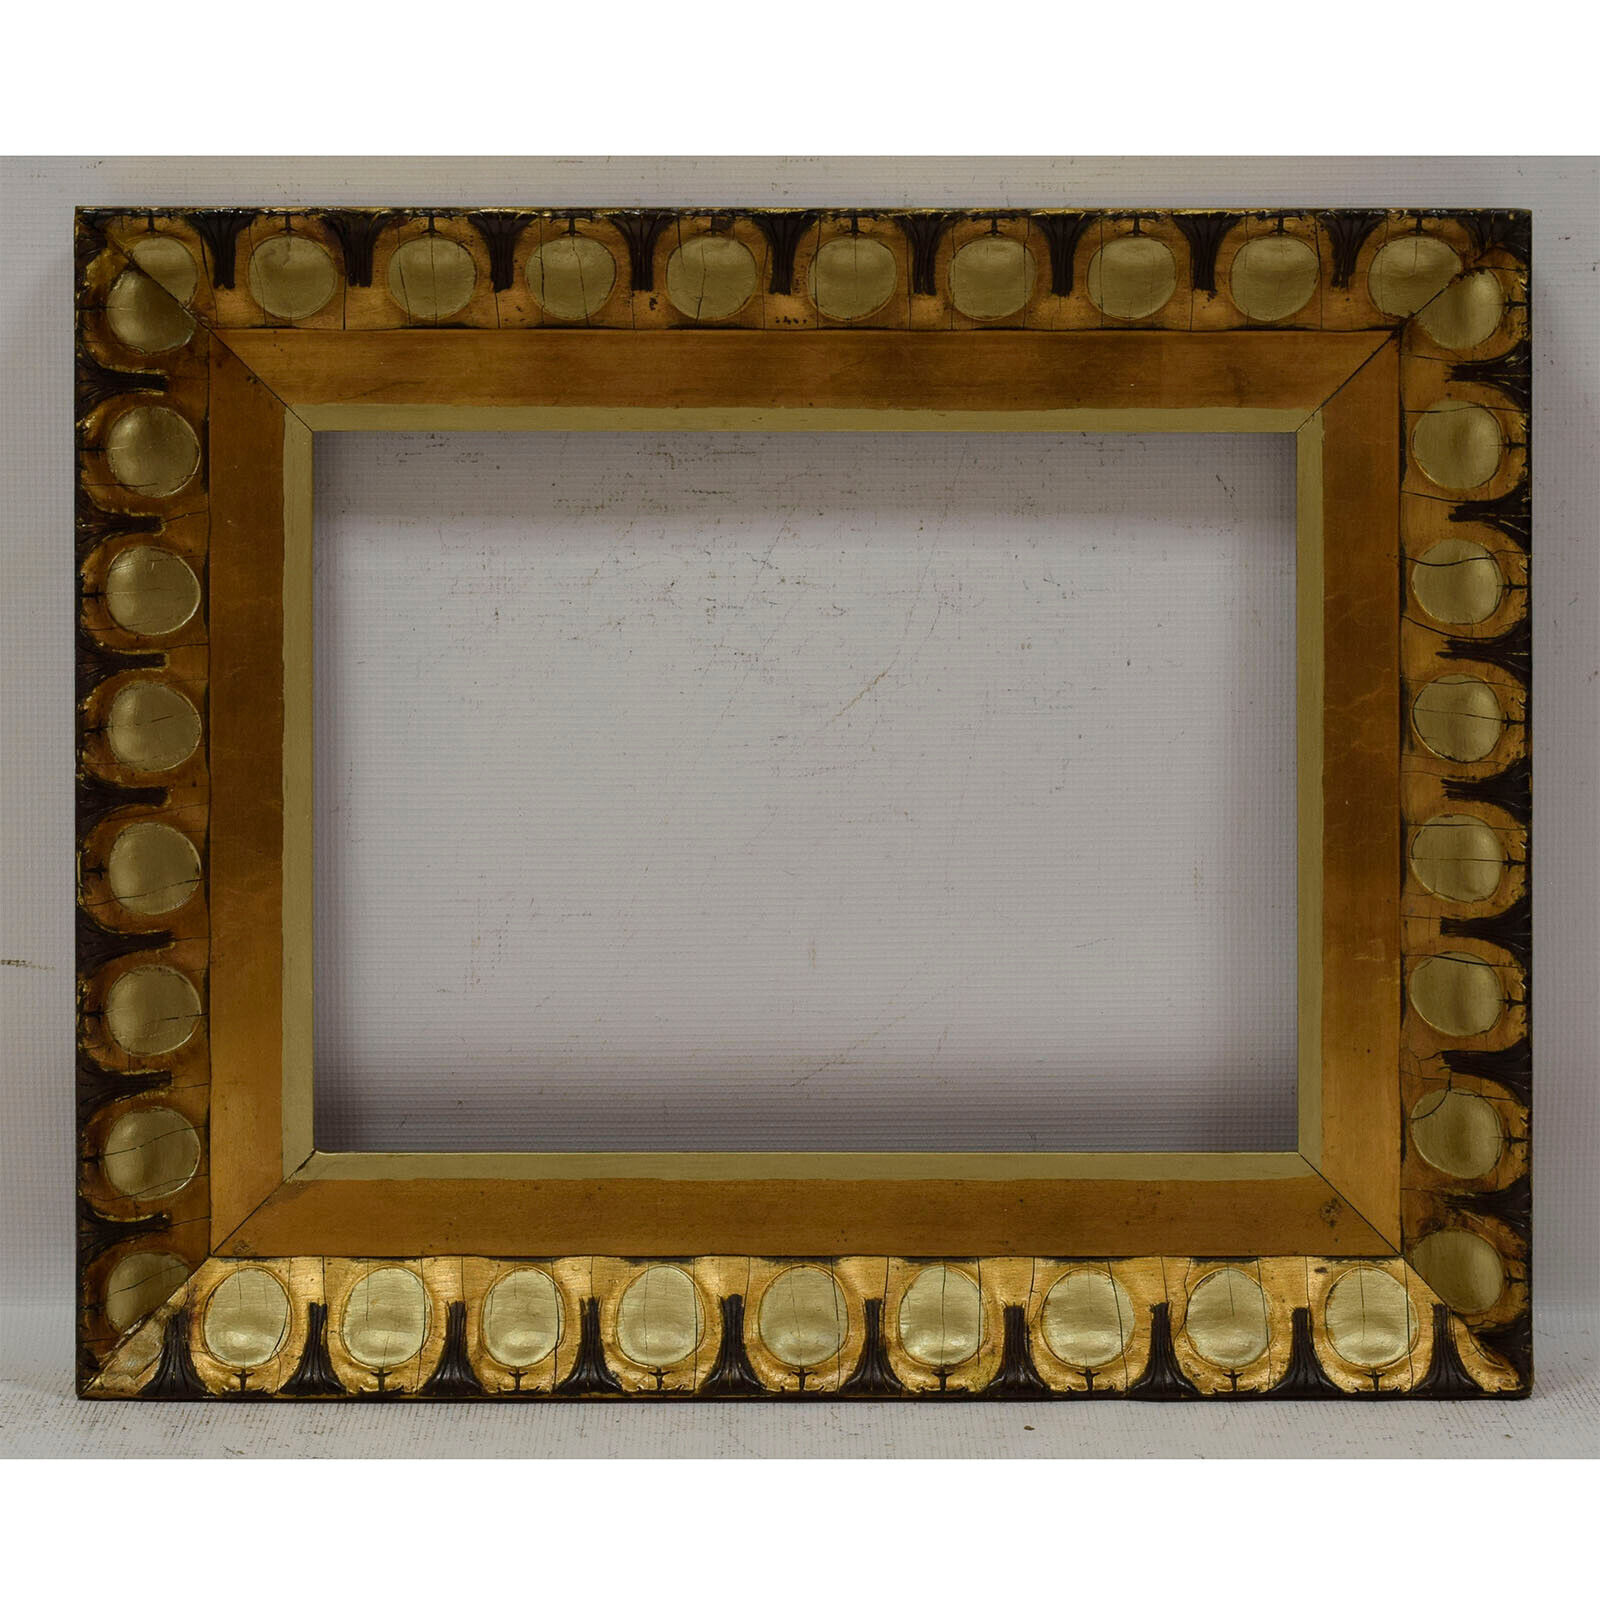 Ca 1850-1900 Old wooden frame with metal leaf Internal: 15,9x11,8 in